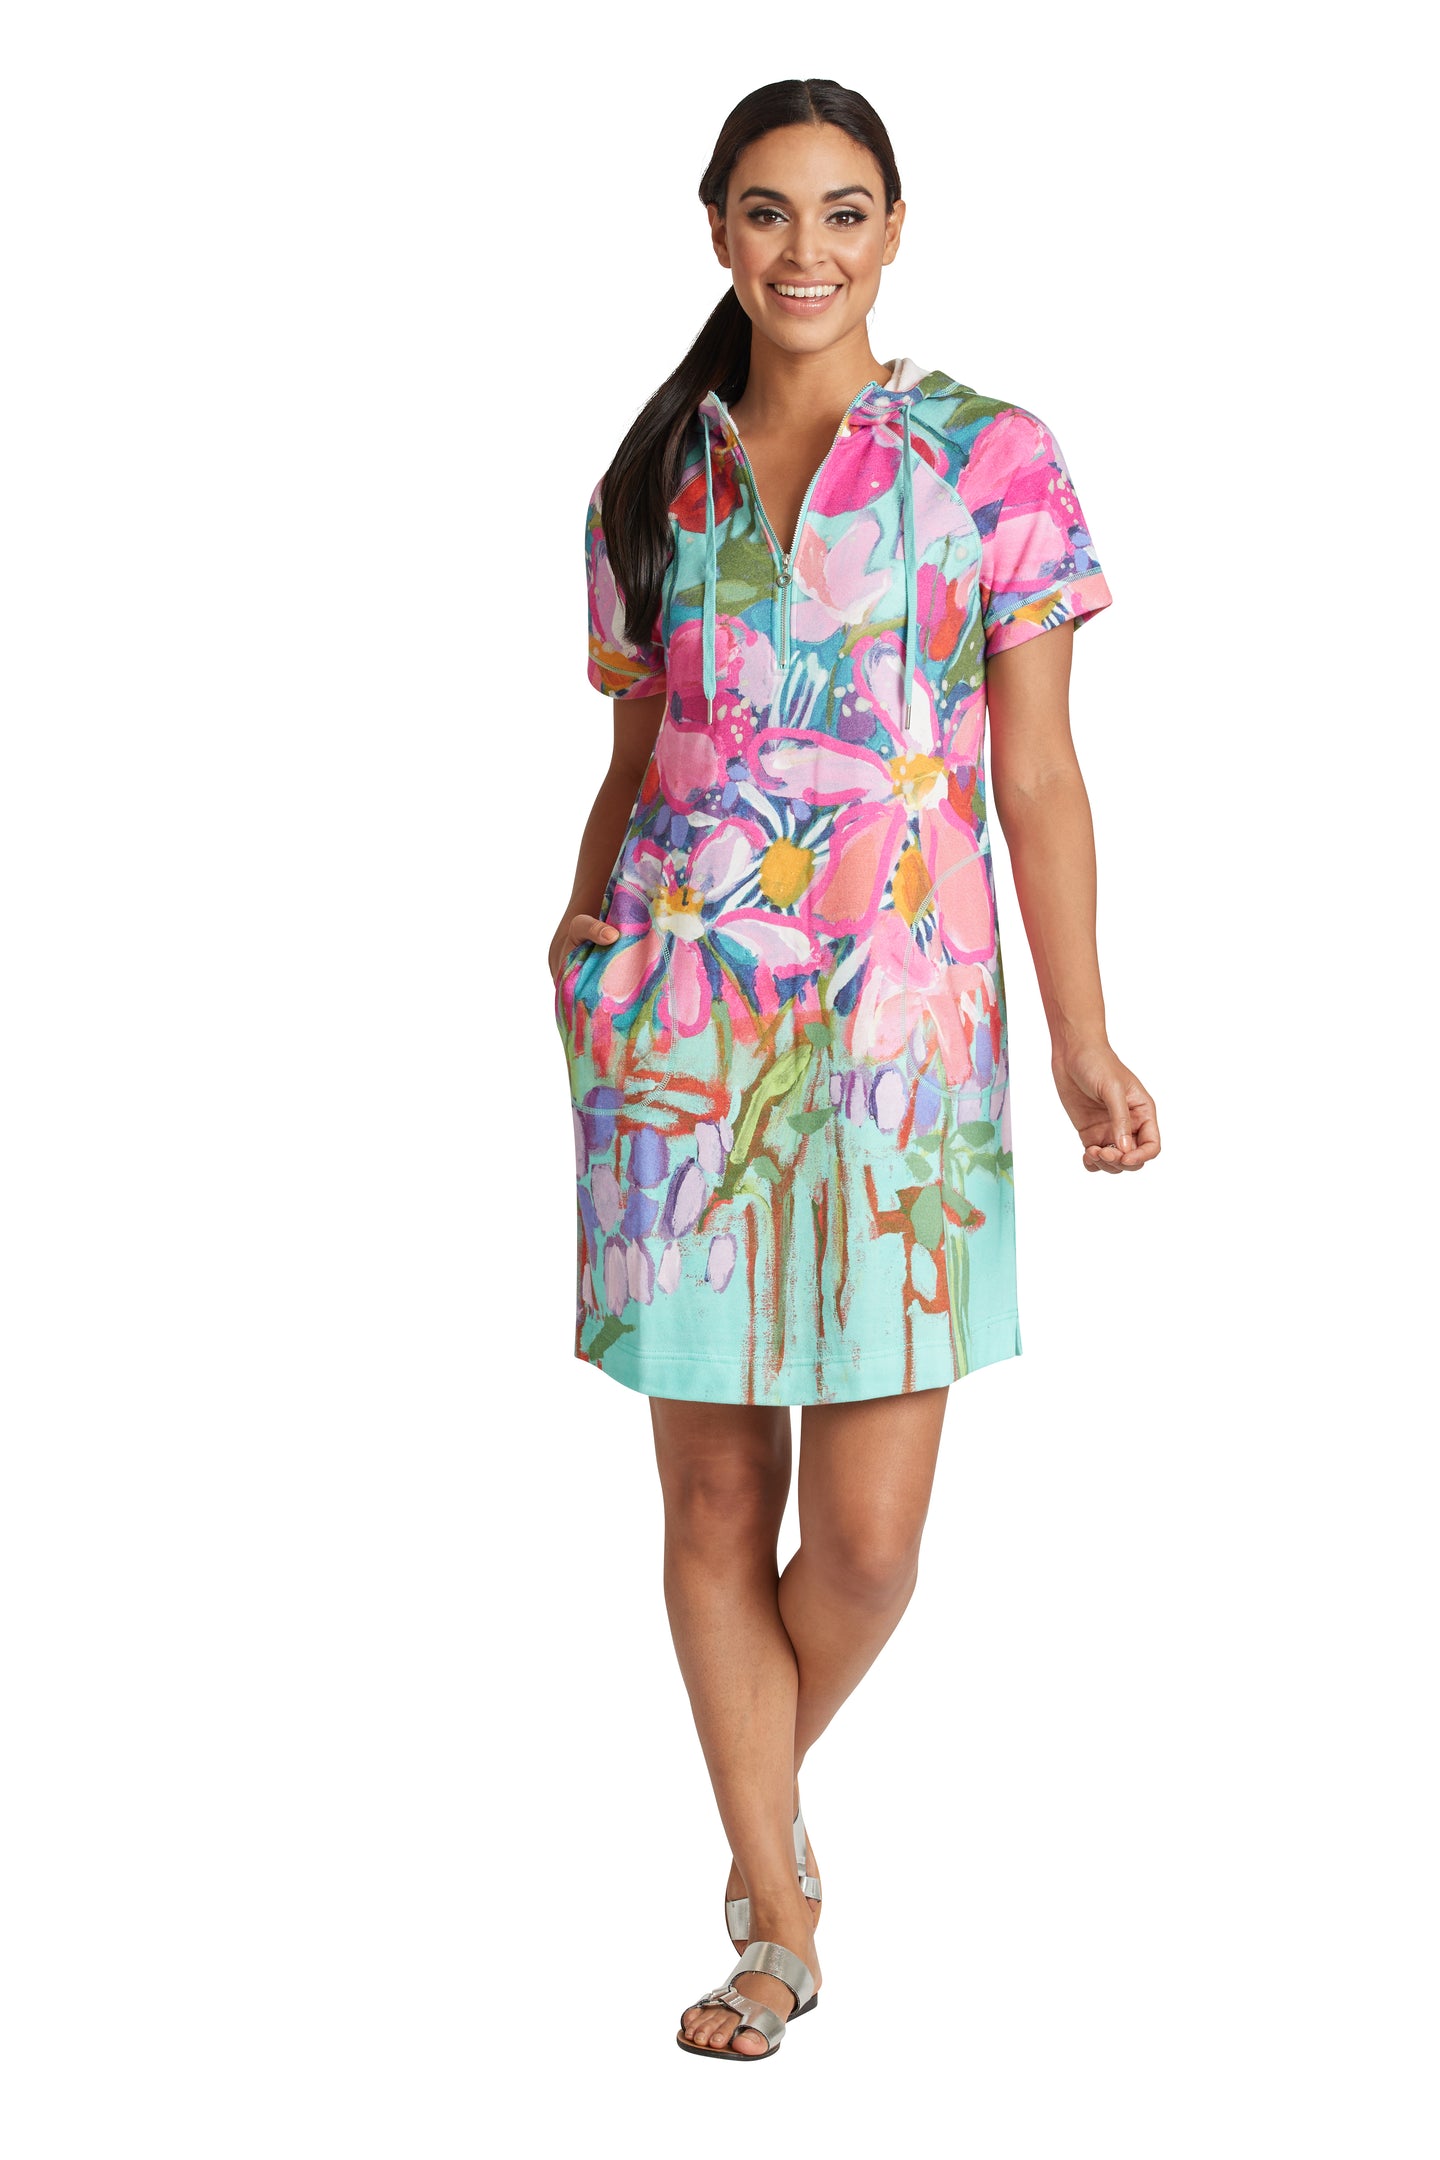 Down by the Ponds Edge short sleeve hoodie dress